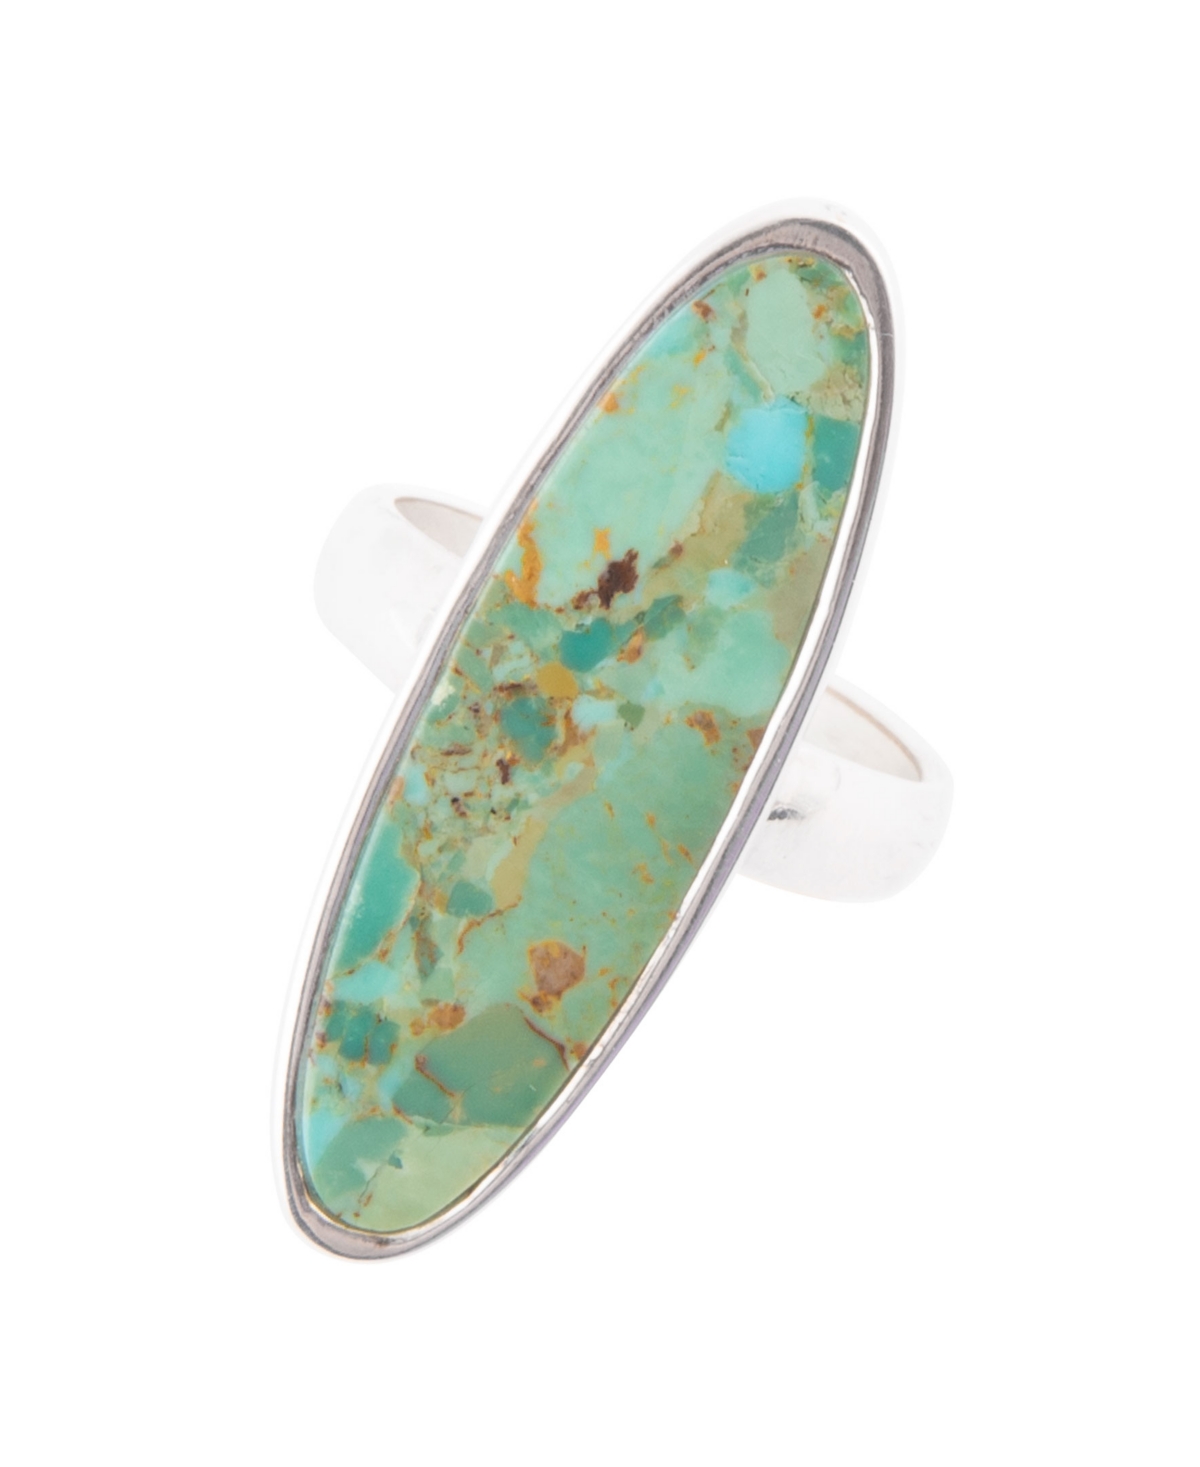 Pueblo Genuine Turquoise Sterling Silver Oval Ring - Genuine turquoise